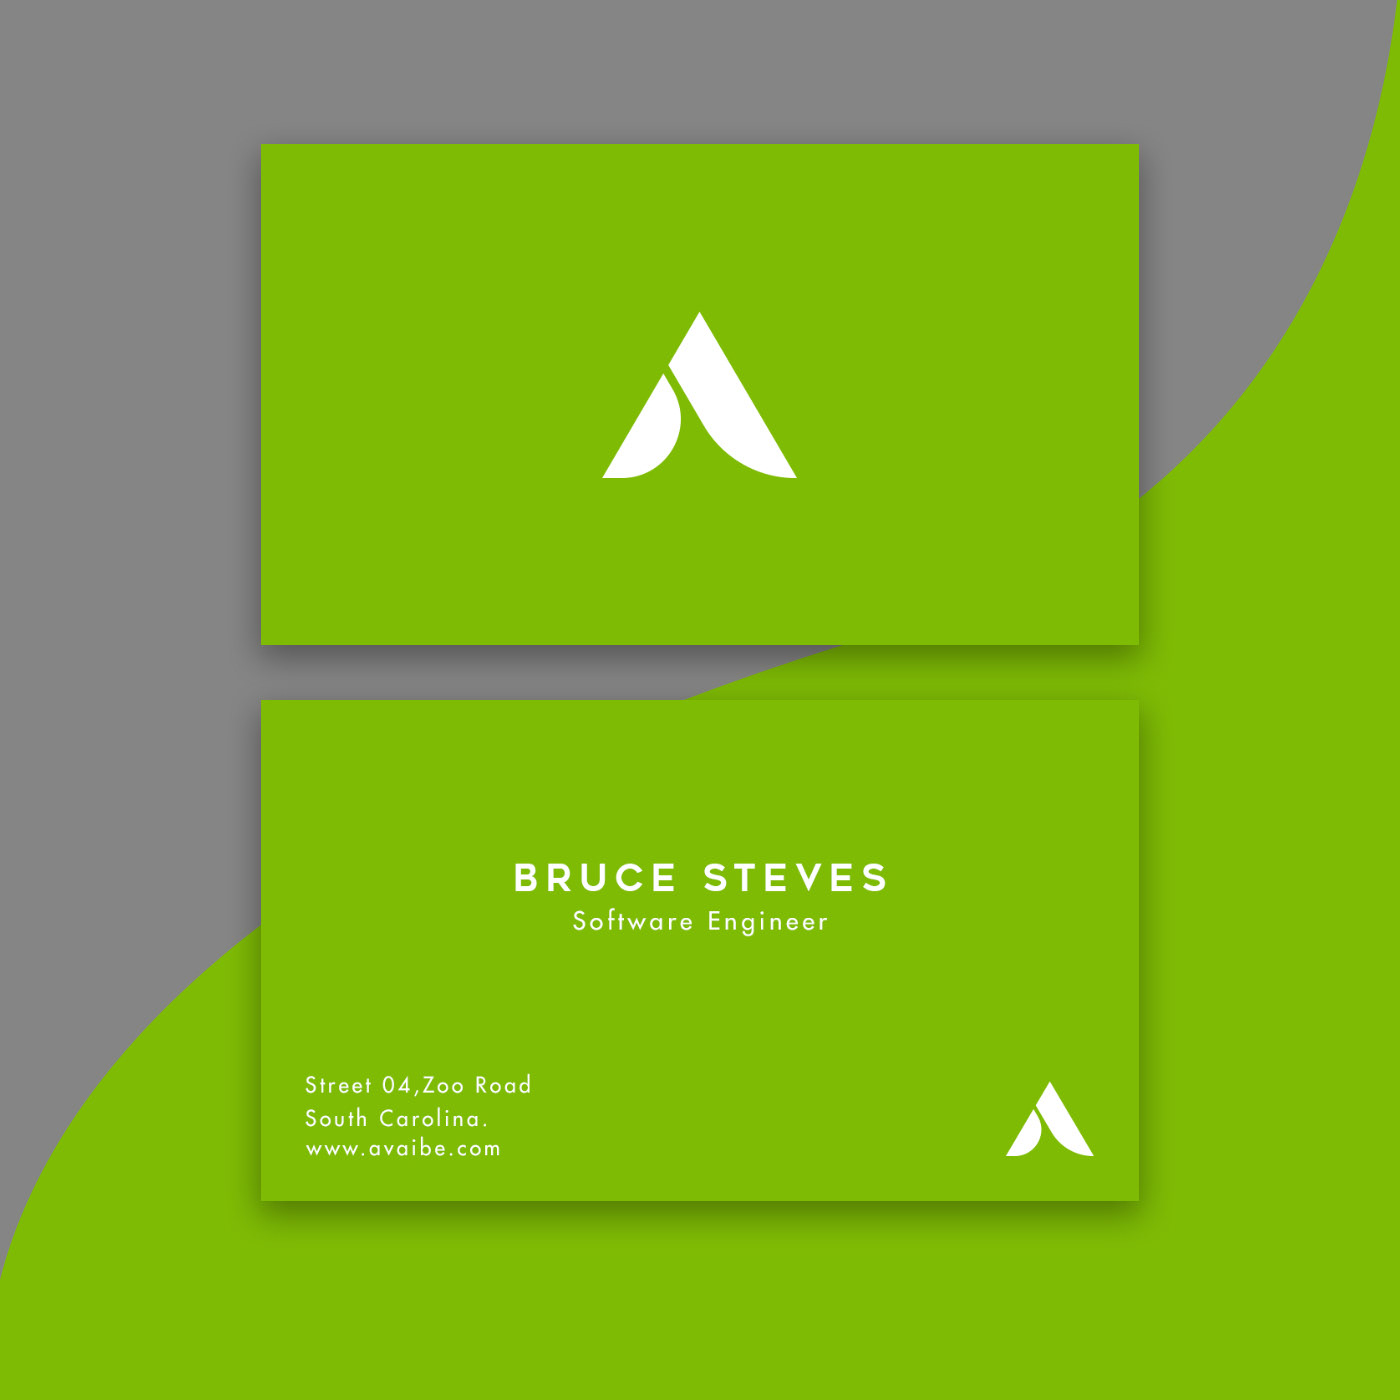 business business card card visiting card businesscard identity Brand Design marketing   Advertising  visual identity